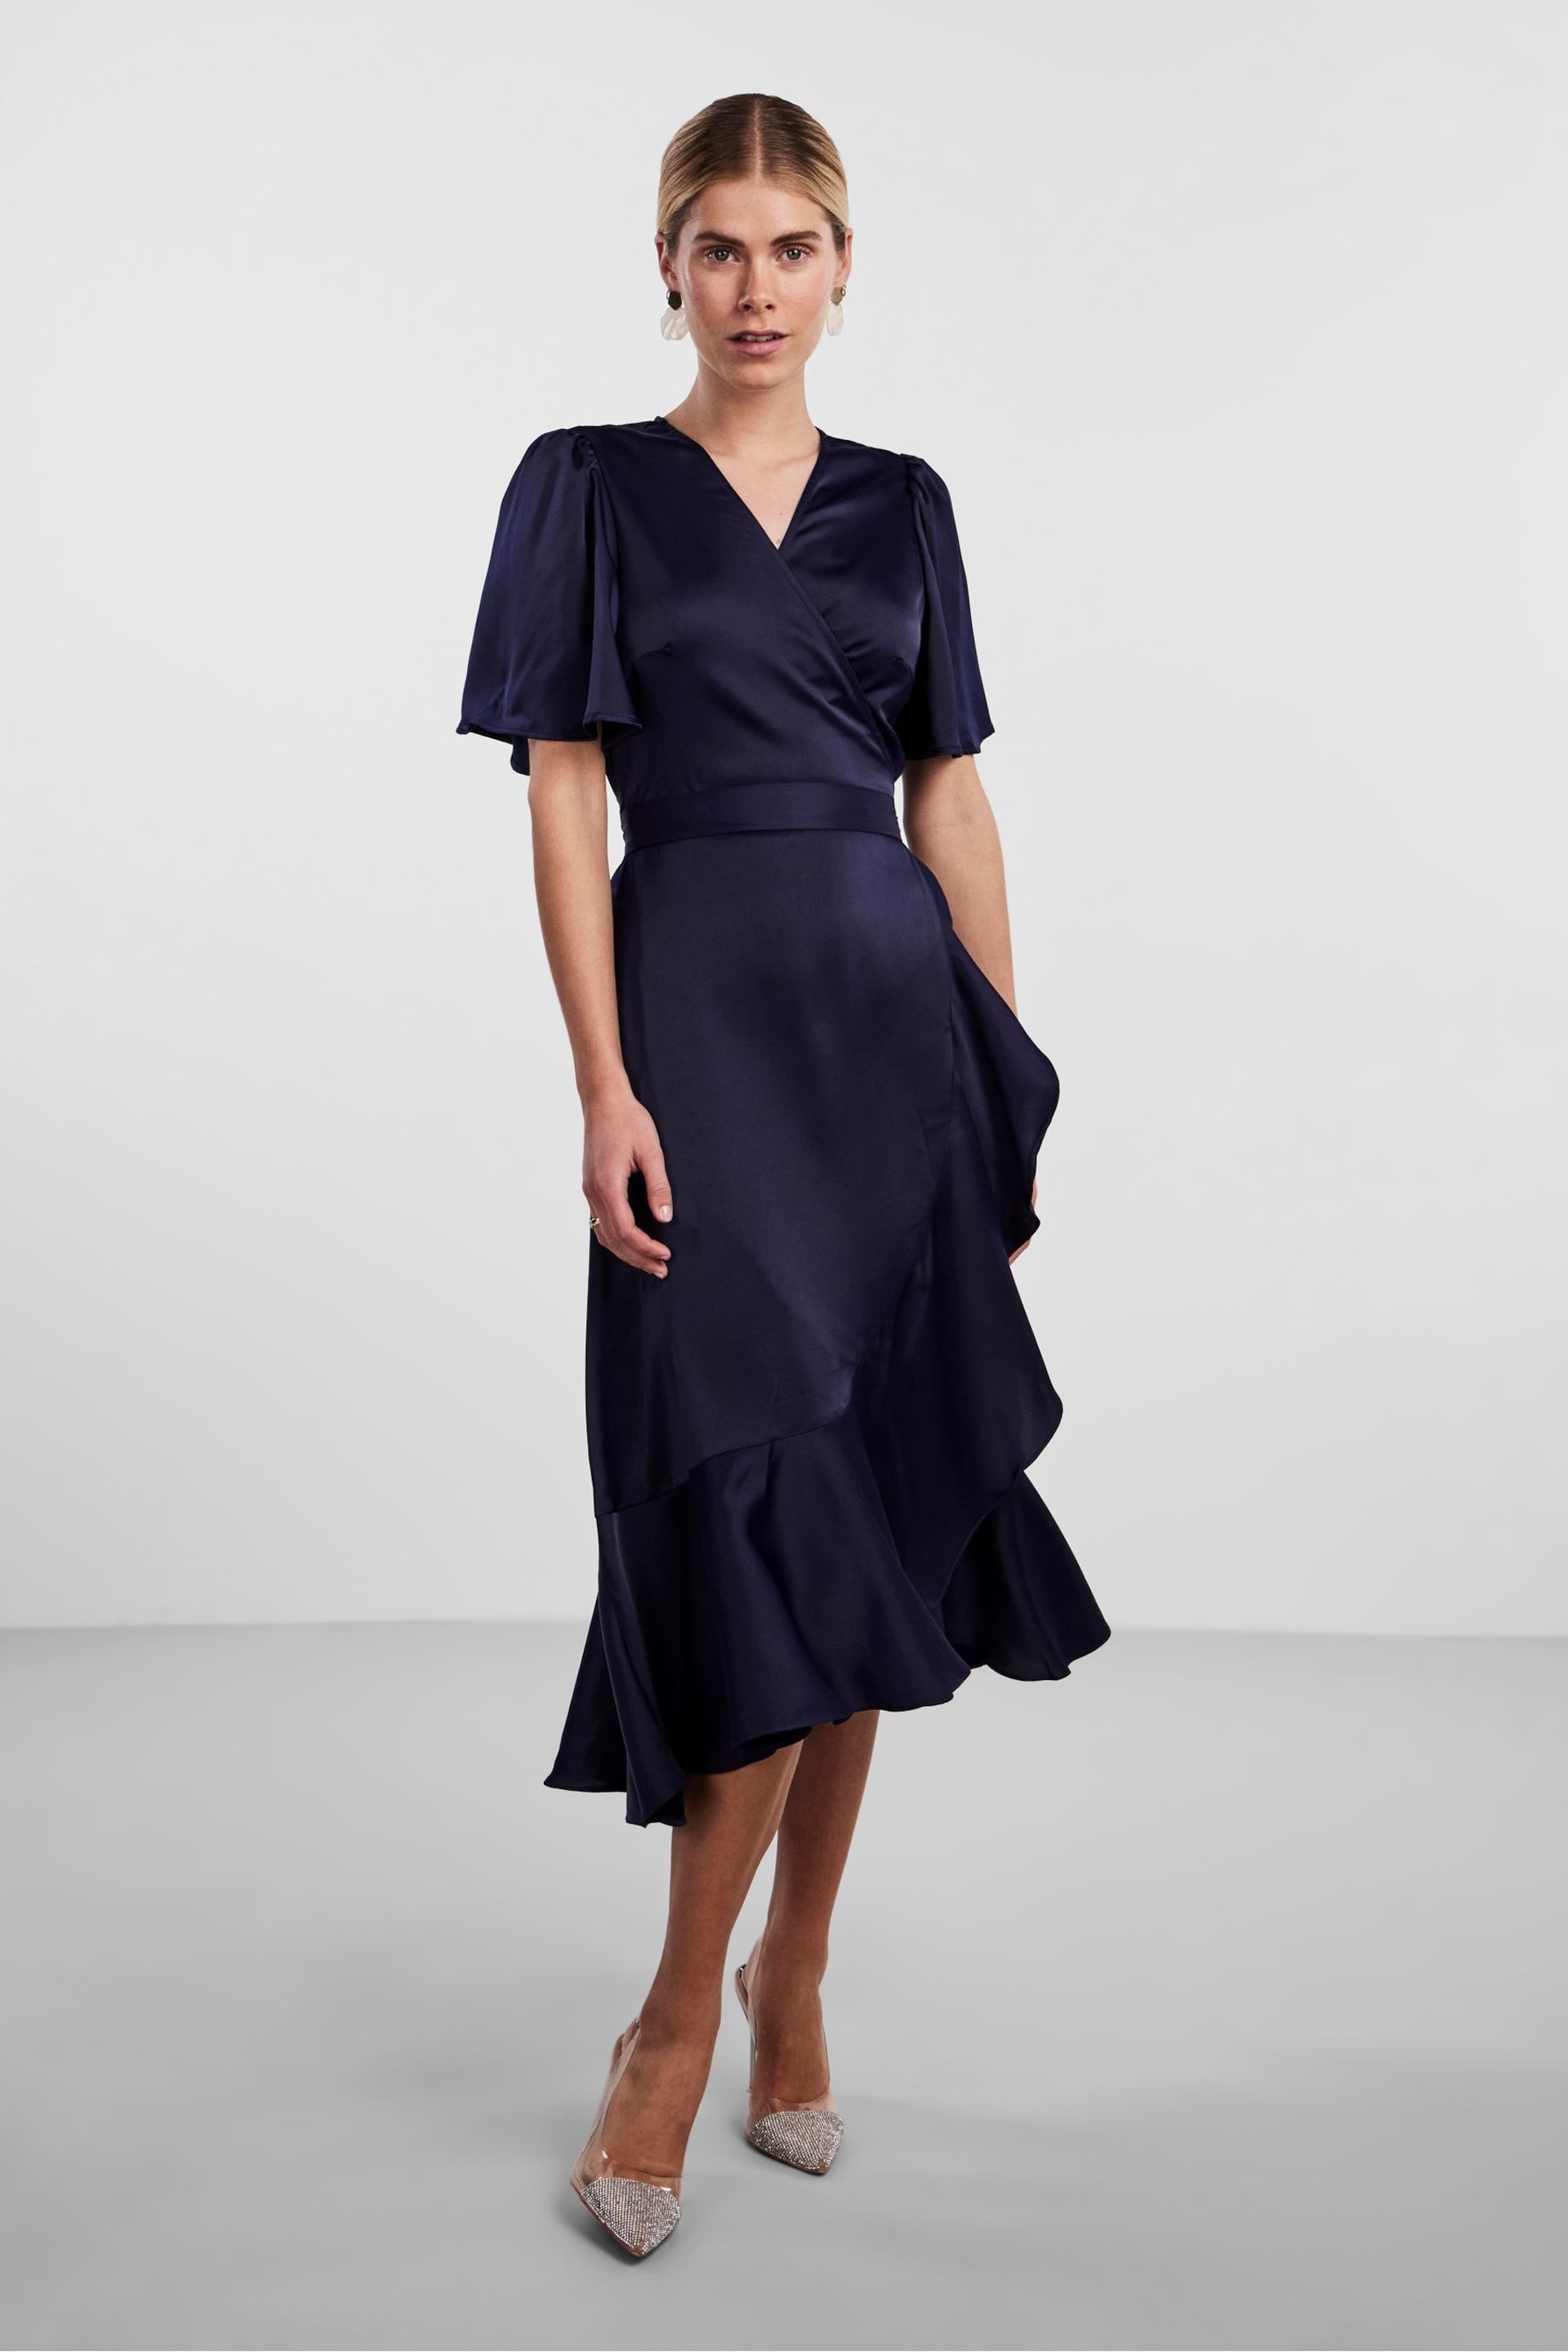 Y.A.S Navy Satin Short Sleeve Wrap & Ruffle Midi Occasion Dress - Image 1 of 5